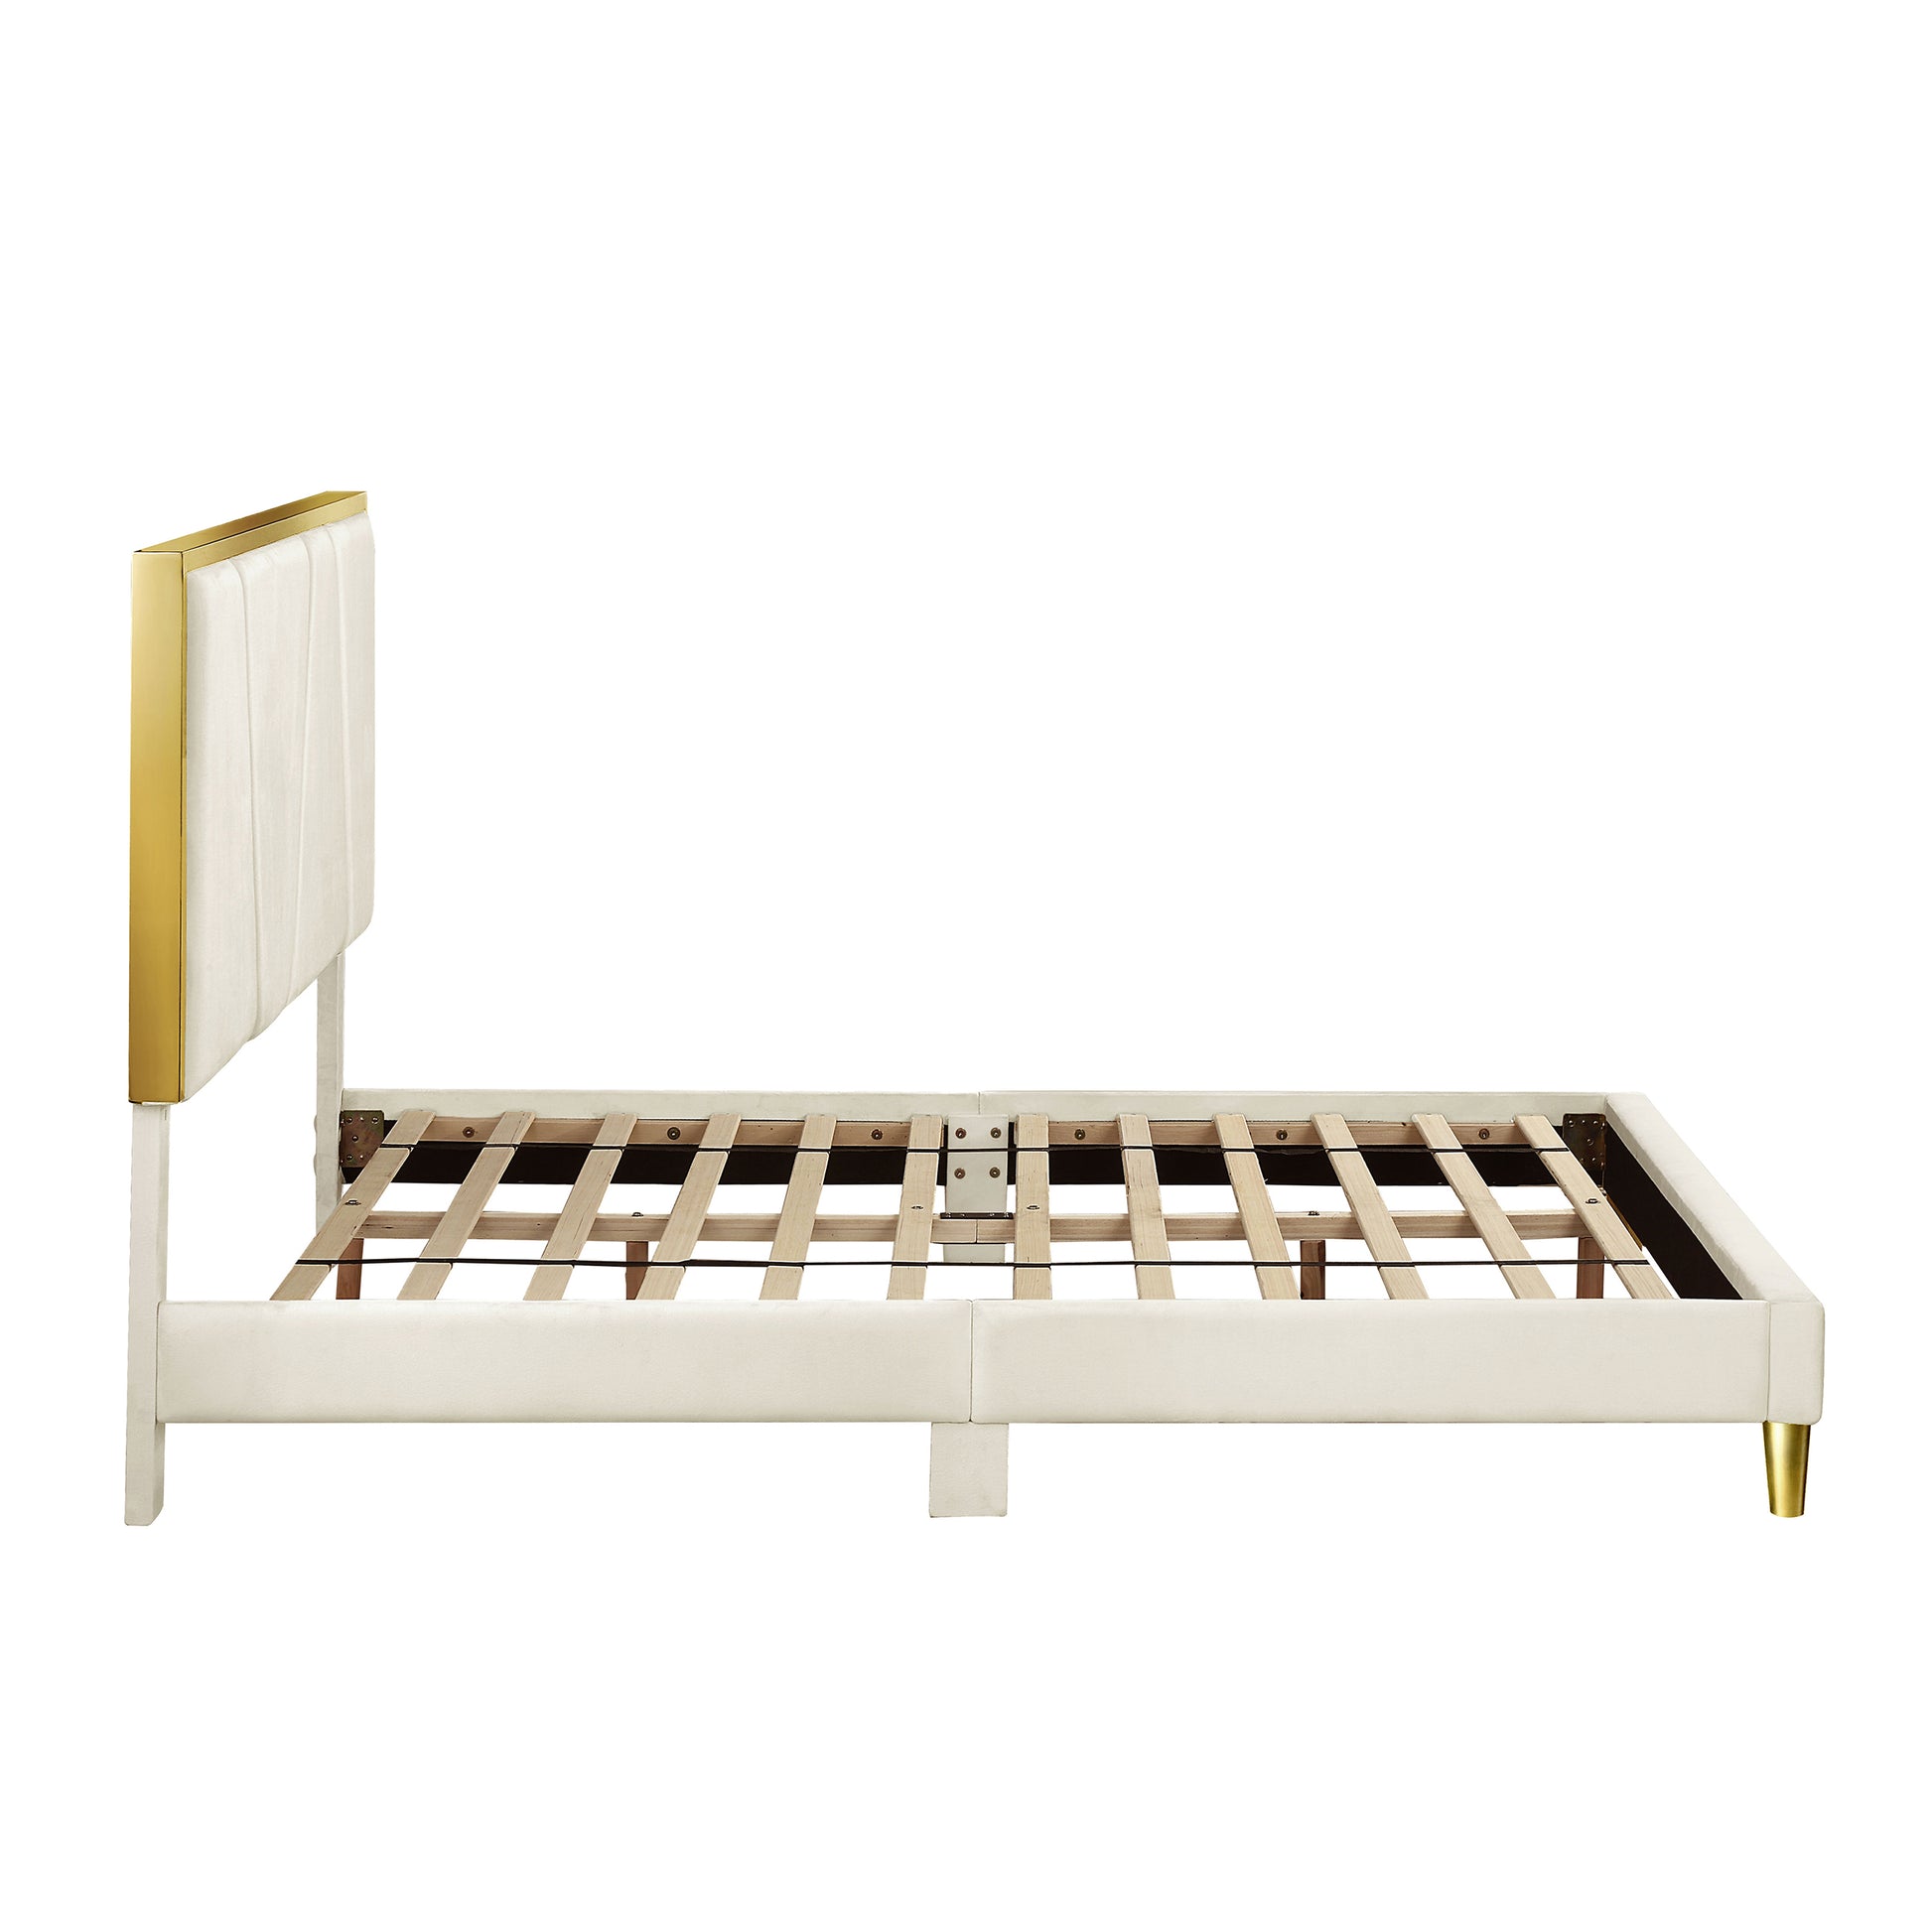 Front-facing side view of a contemporary beige and gold upholstered queen bed with slats shown on a white background